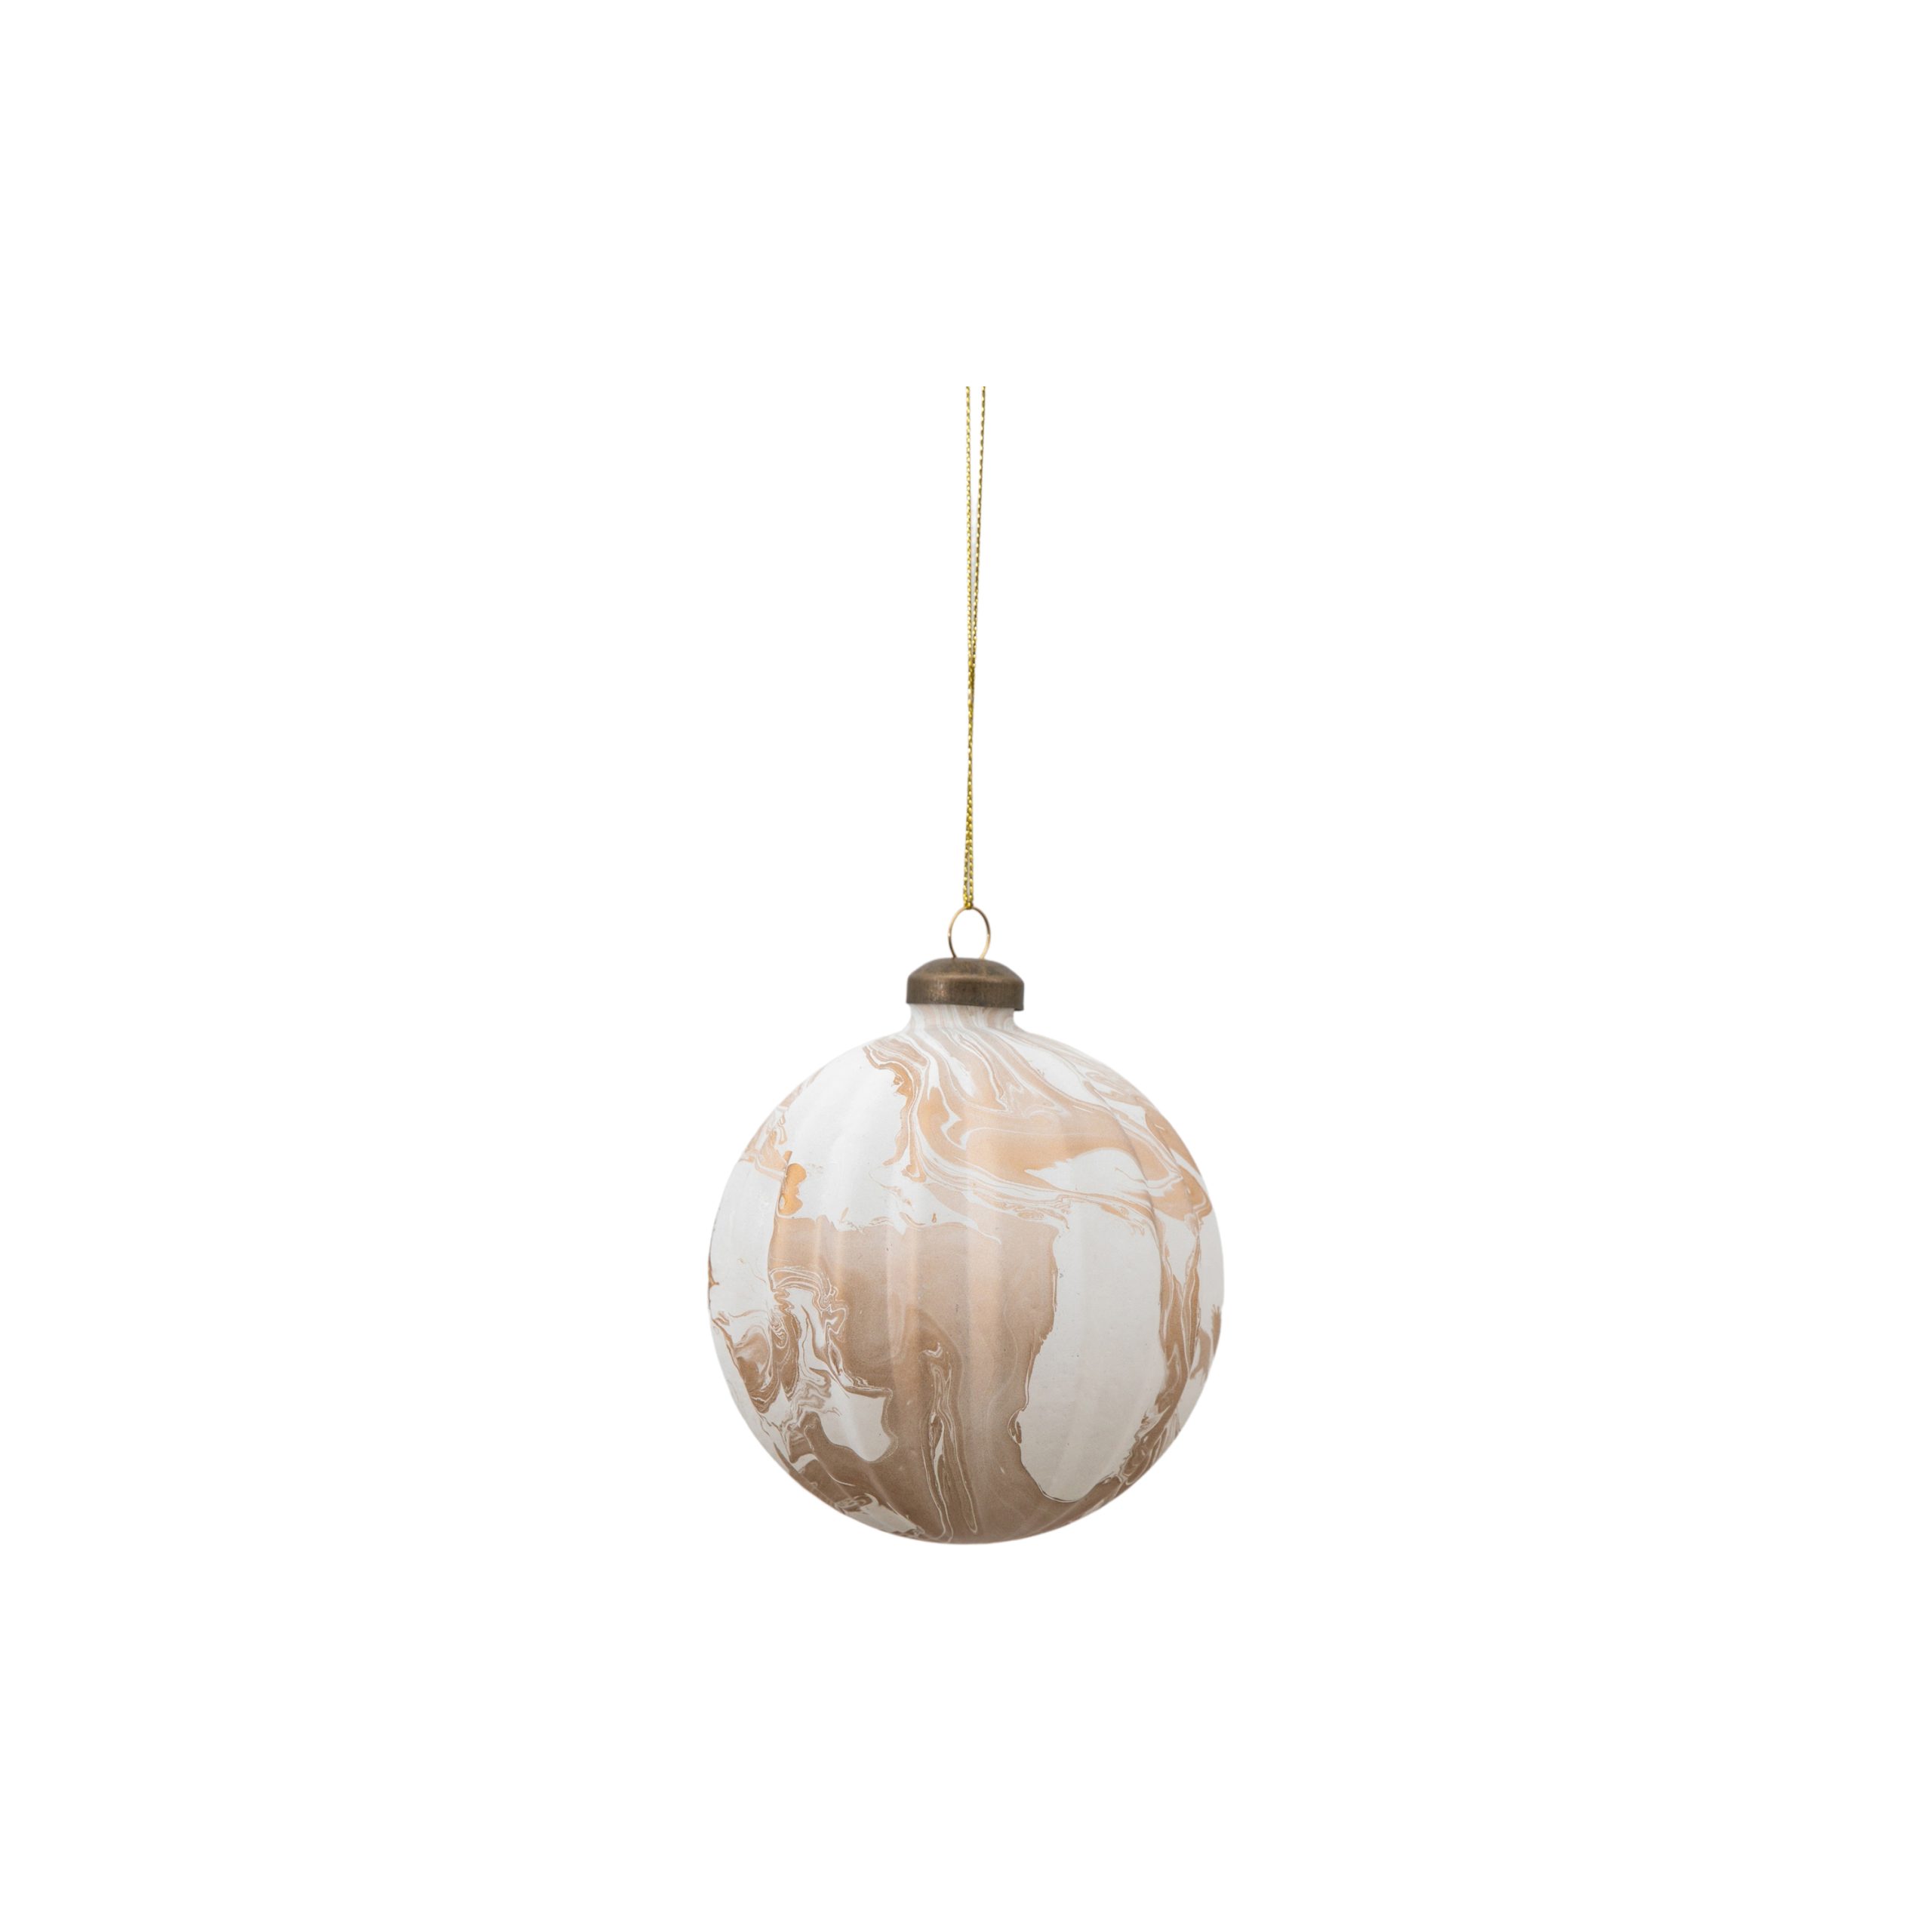 Gallery Direct Tula Bauble Marbled Bronze (Set of 3)